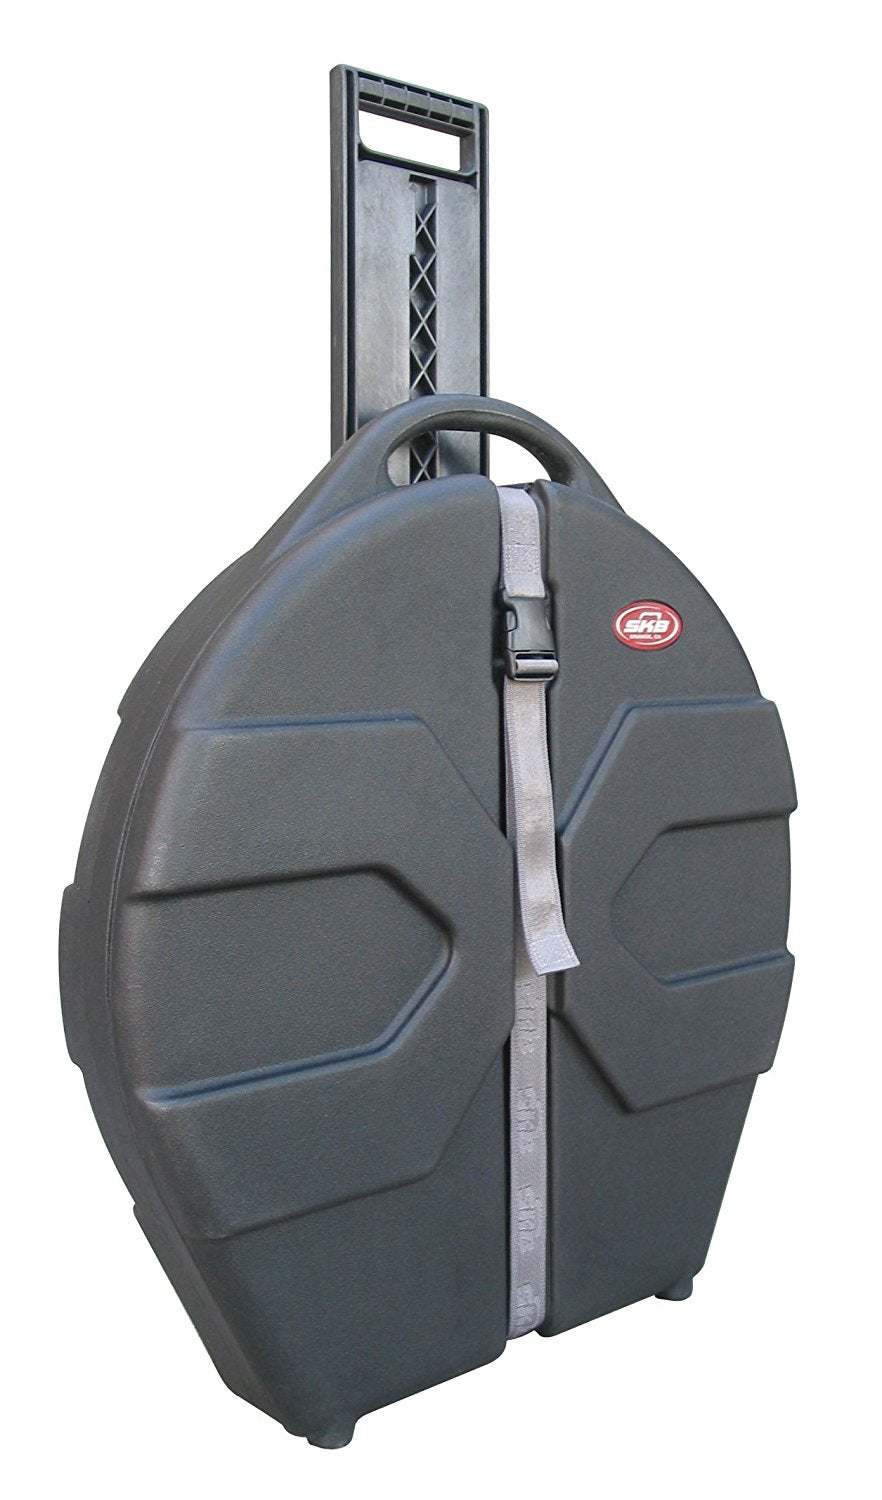 SKB ATA 24 Cymbal Vault with Handle and Wheels